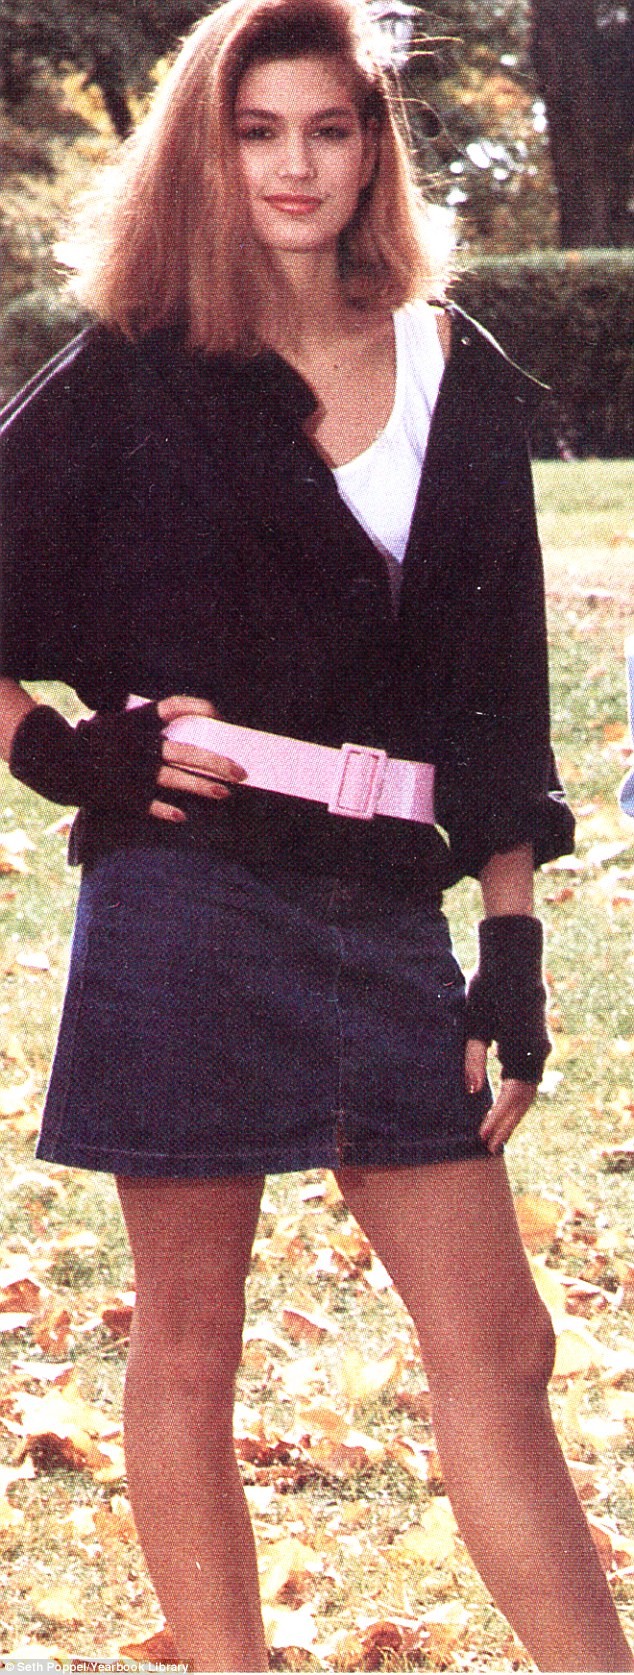 Already a stunner: The Vogue favorite already showed she had model skills when she was a teenager; here she is seen in 1984